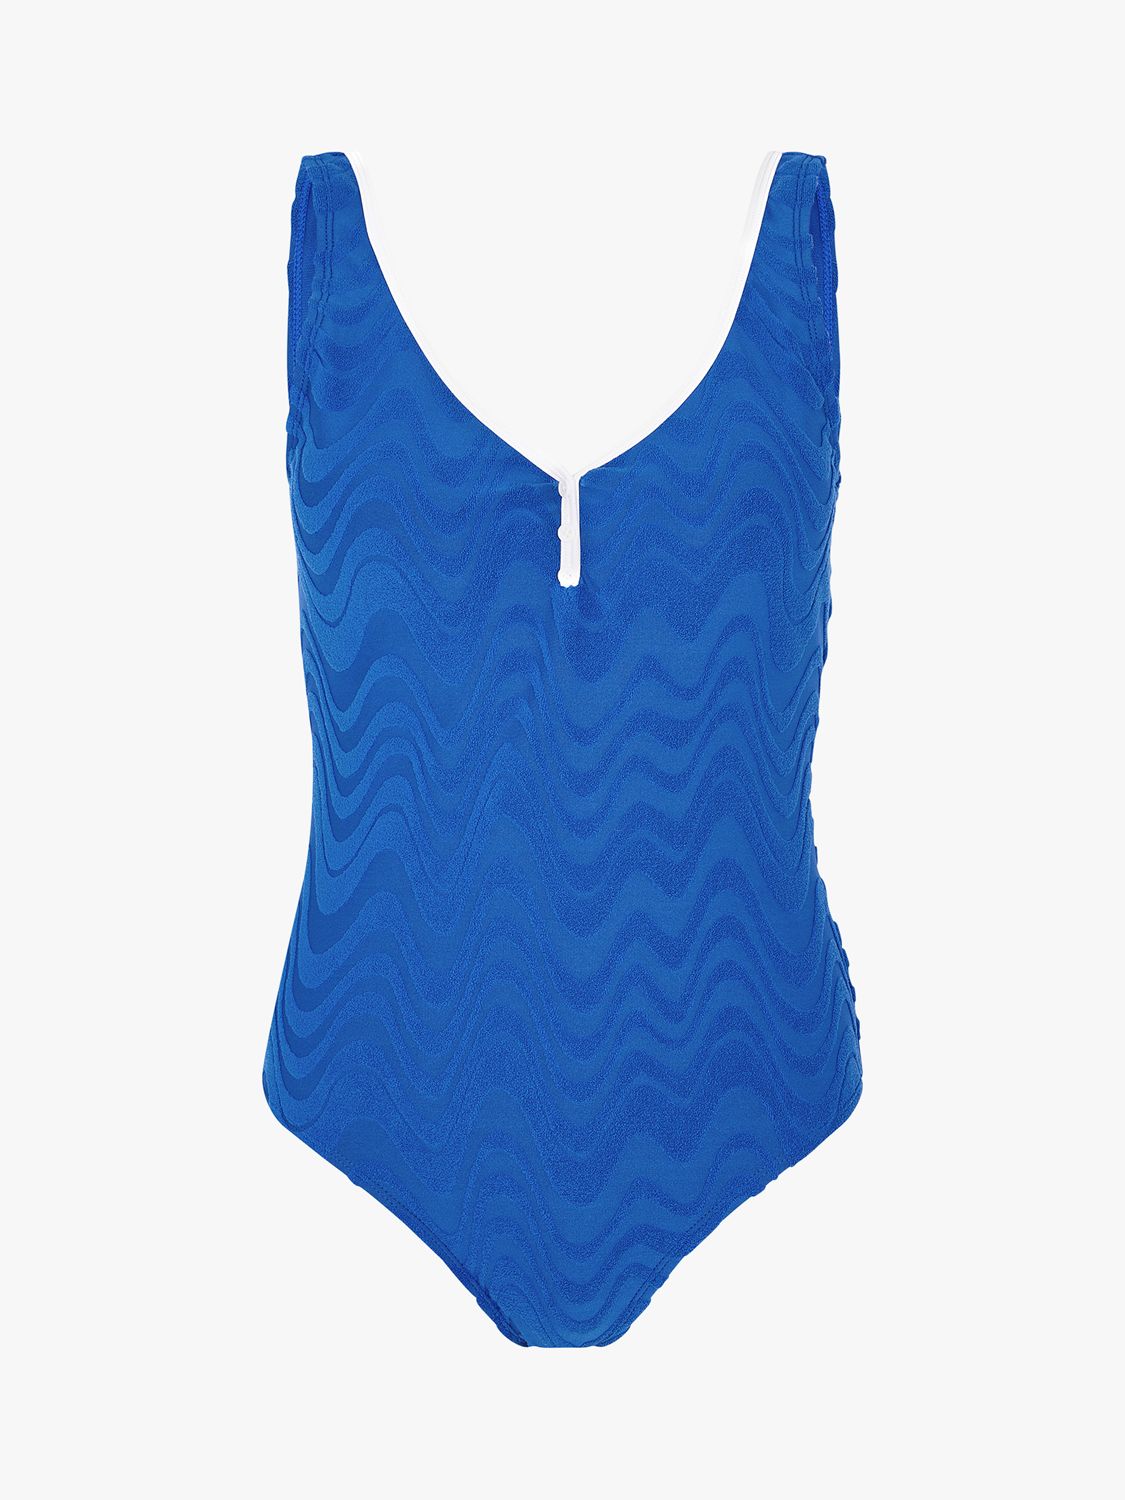 Accessorize Textured Swimsuit, Blue/White at John Lewis & Partners